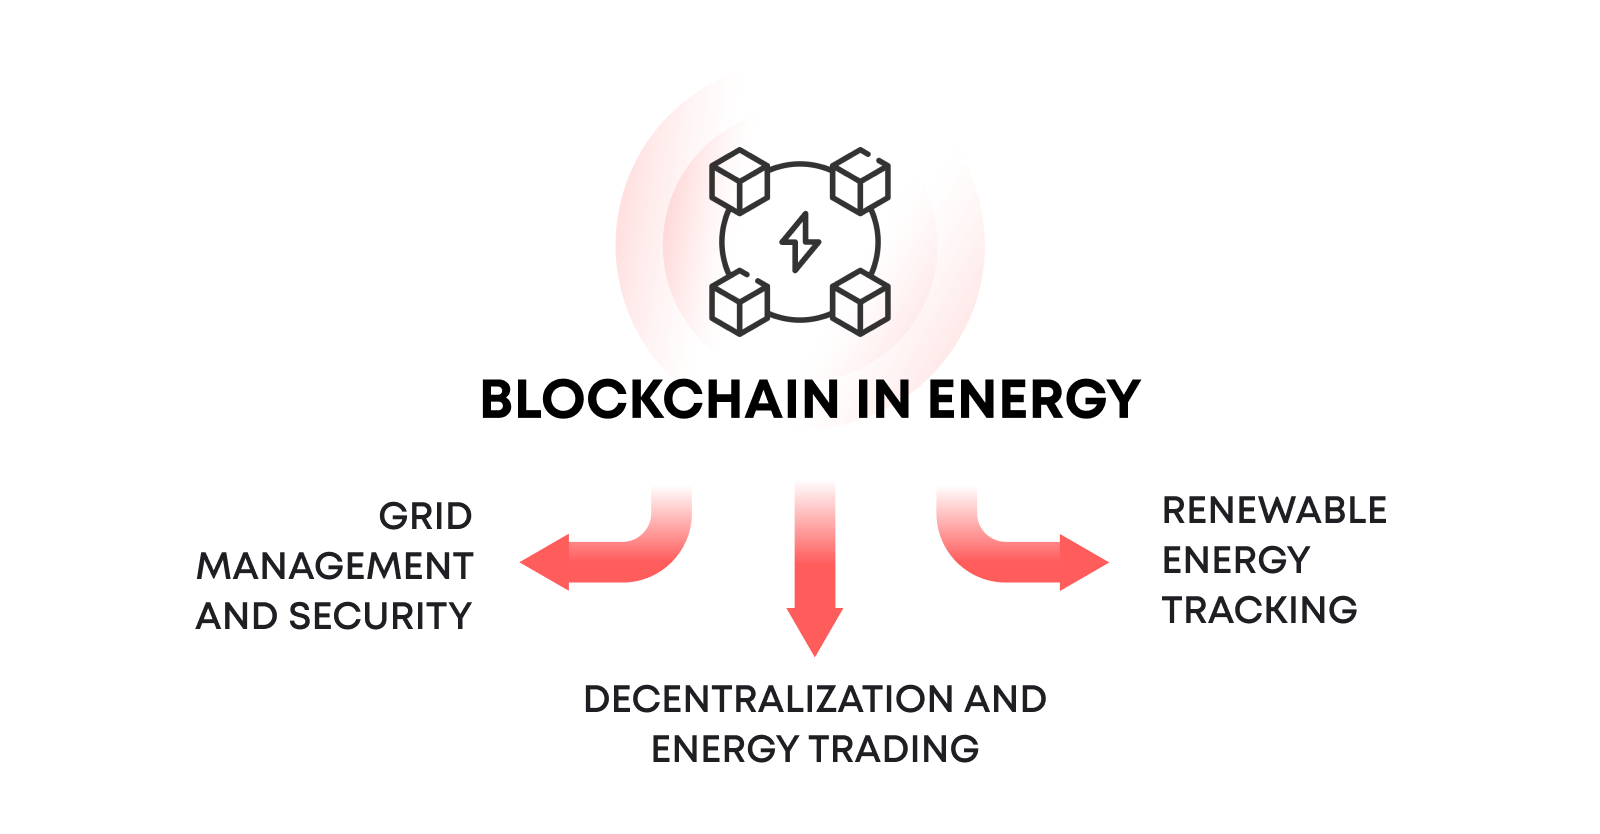 The integration of blockchain technology within the energy sector is an essential development, driving the market forward.